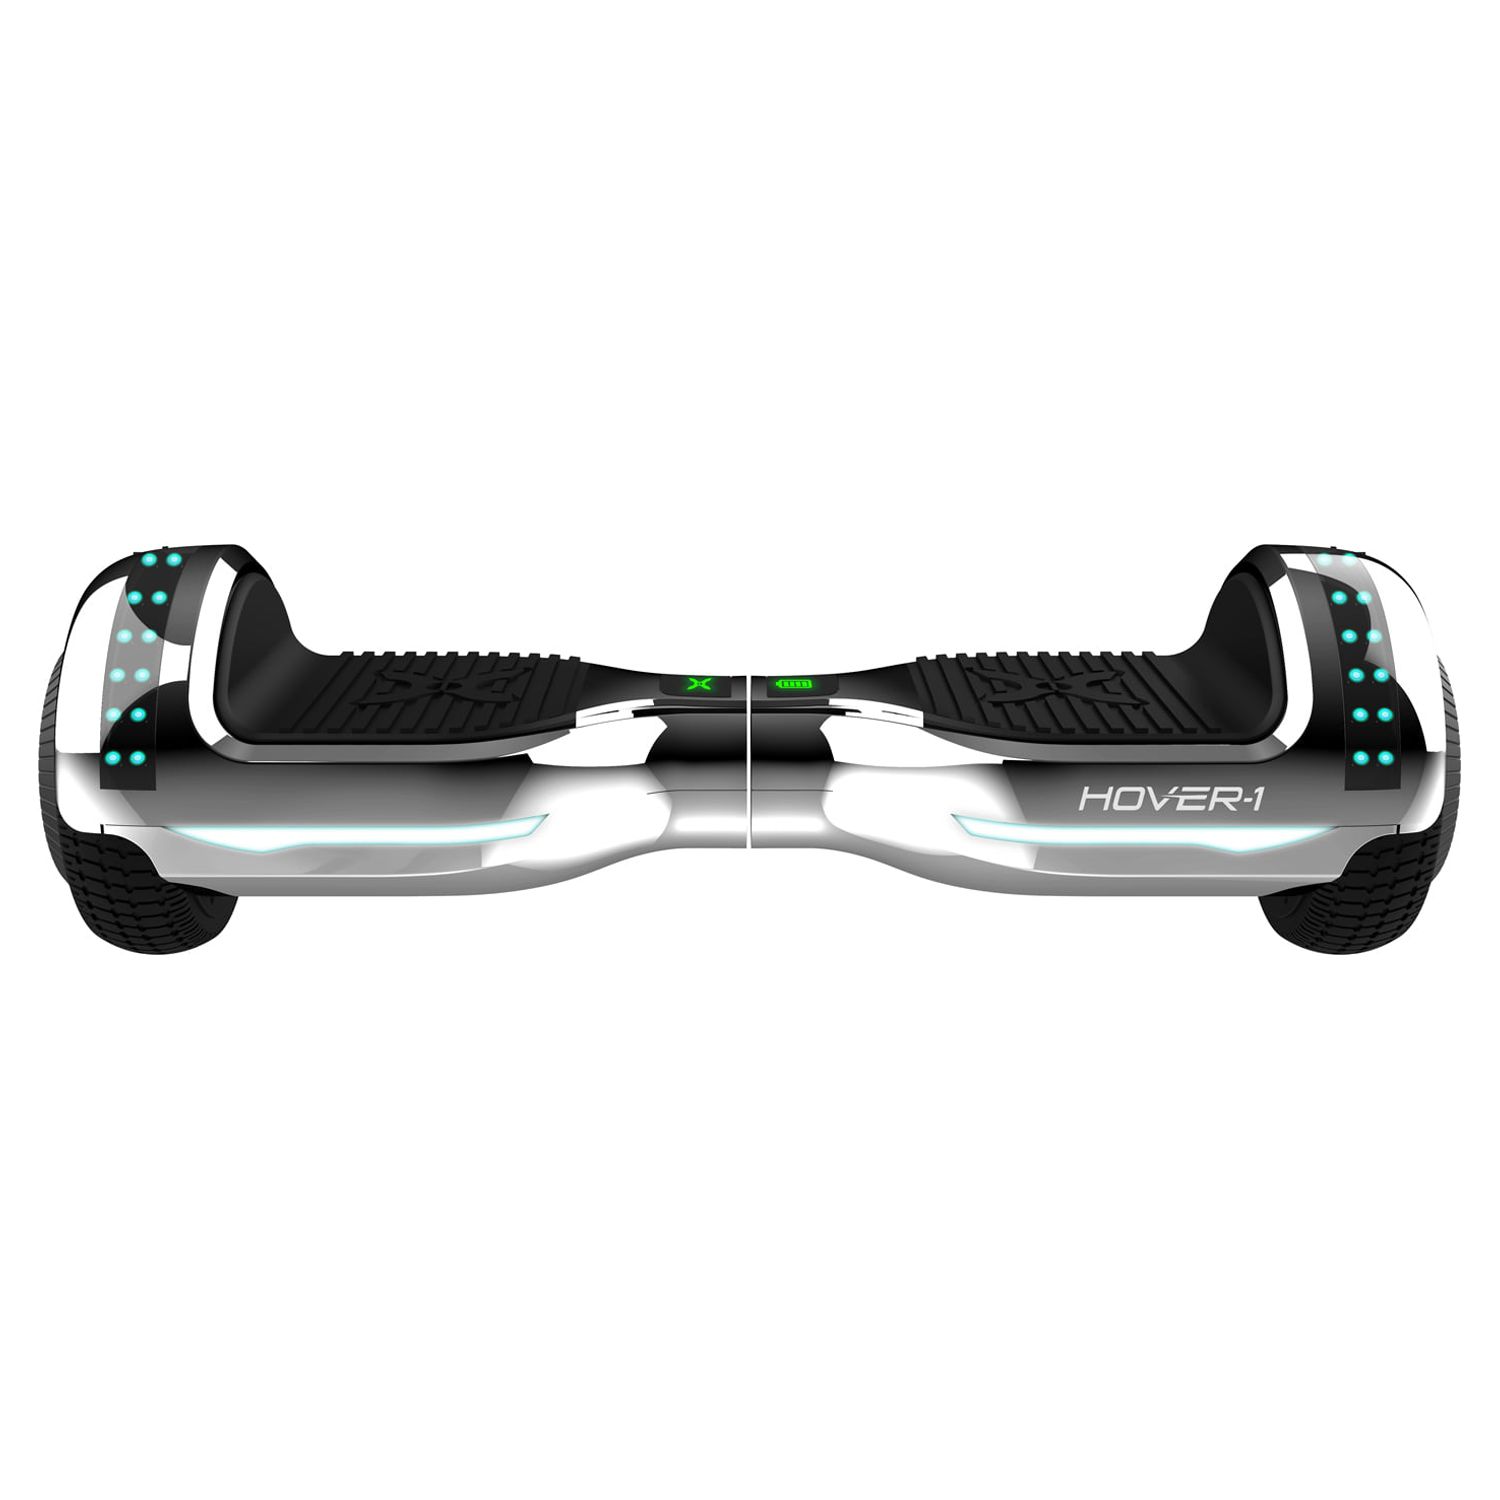 Hover-1 Matrix Hoverboard For Teens, 6.5 in Wheels, 180 lb Maximum Weight, LED Lights & Bluetooth Speaker, Silver - image 4 of 12